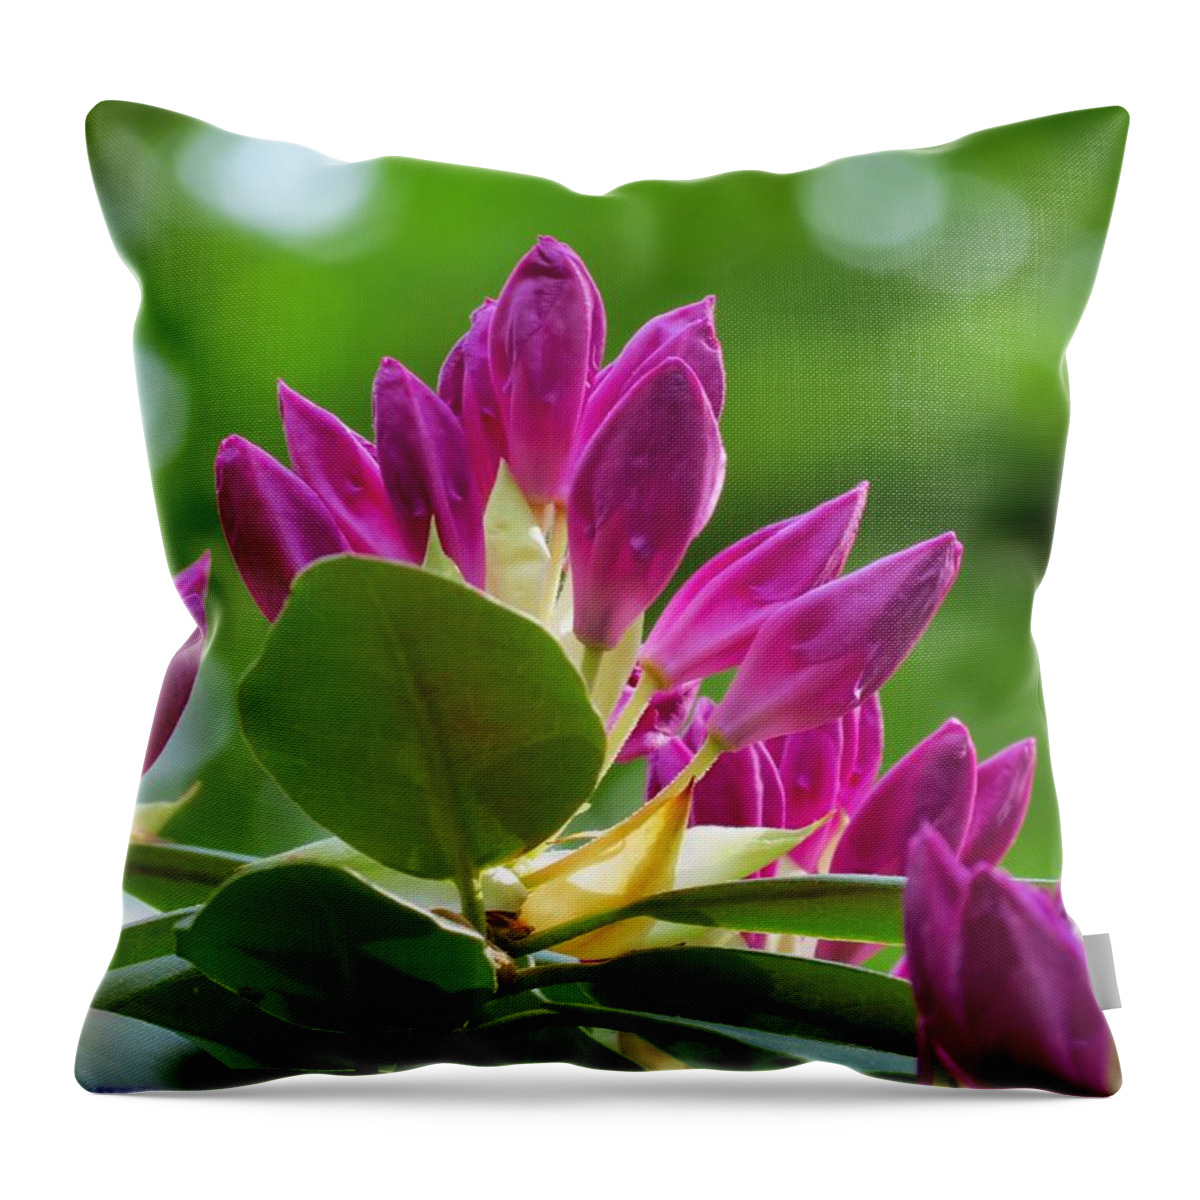 Rhododendron Throw Pillow featuring the photograph Rhododendron Buds by MTBobbins Photography